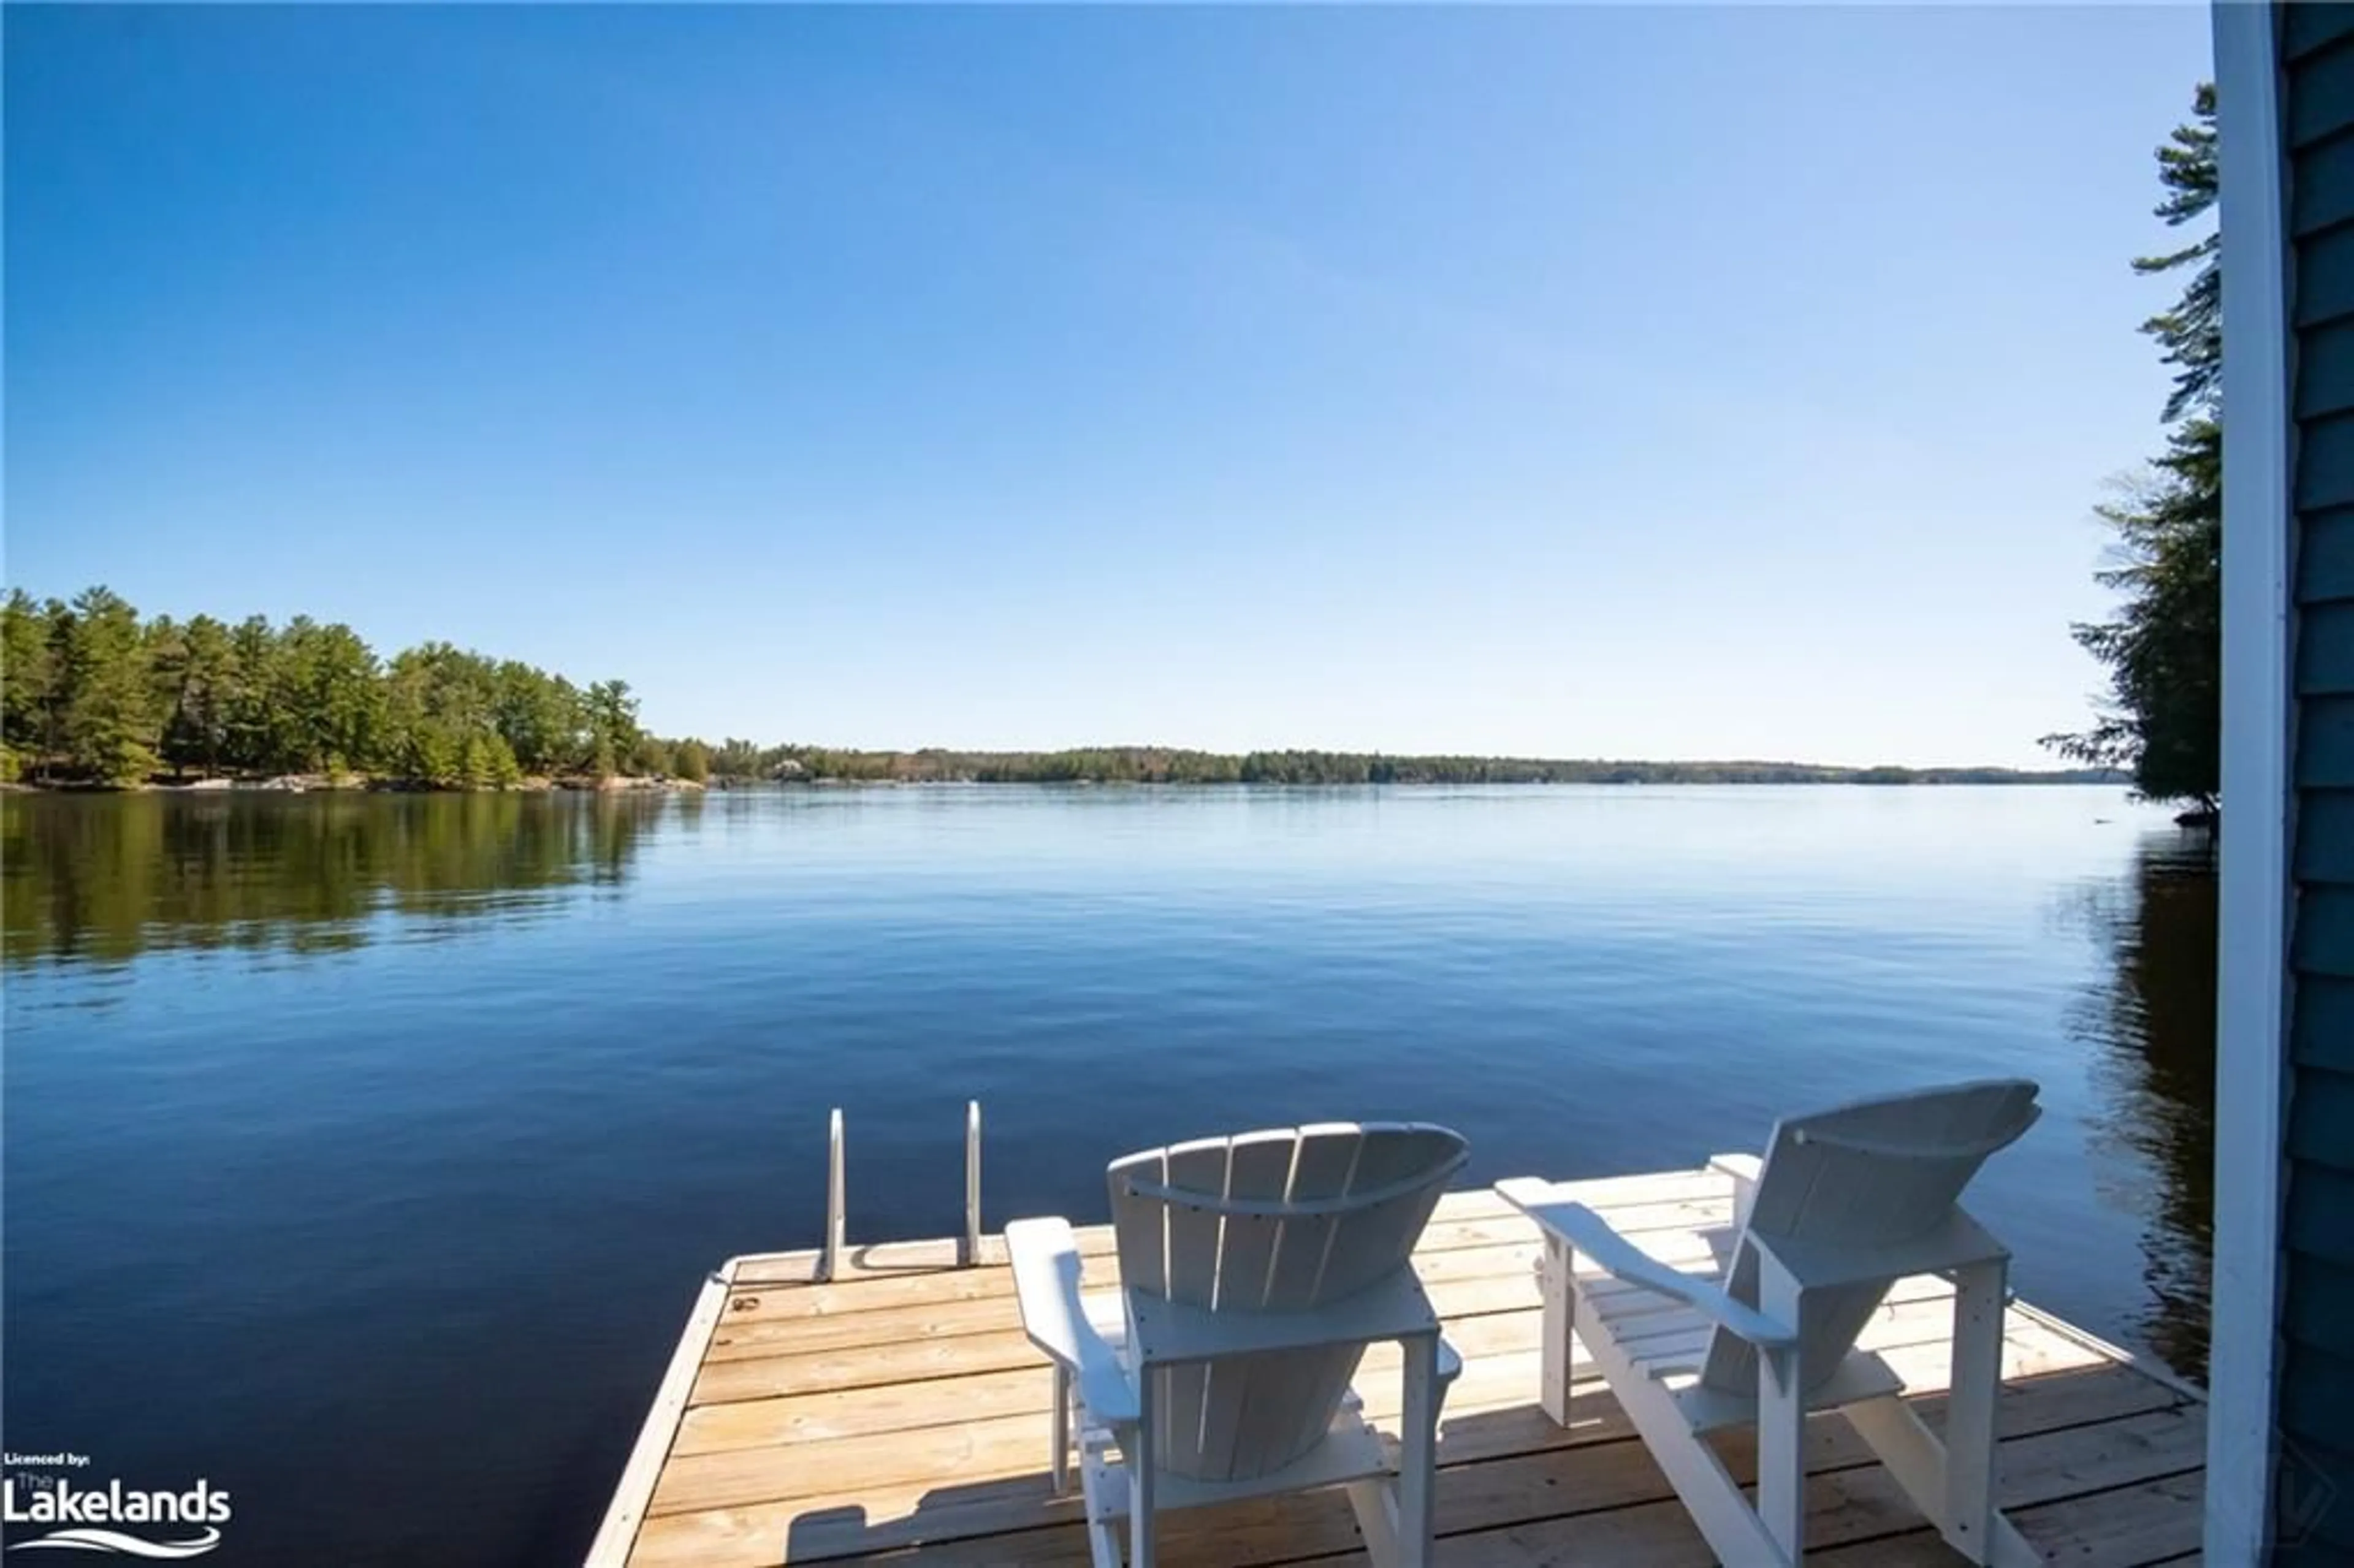 Lakeview for 14-M72 Grandview Island, Milford Bay Ontario P0G 1E0